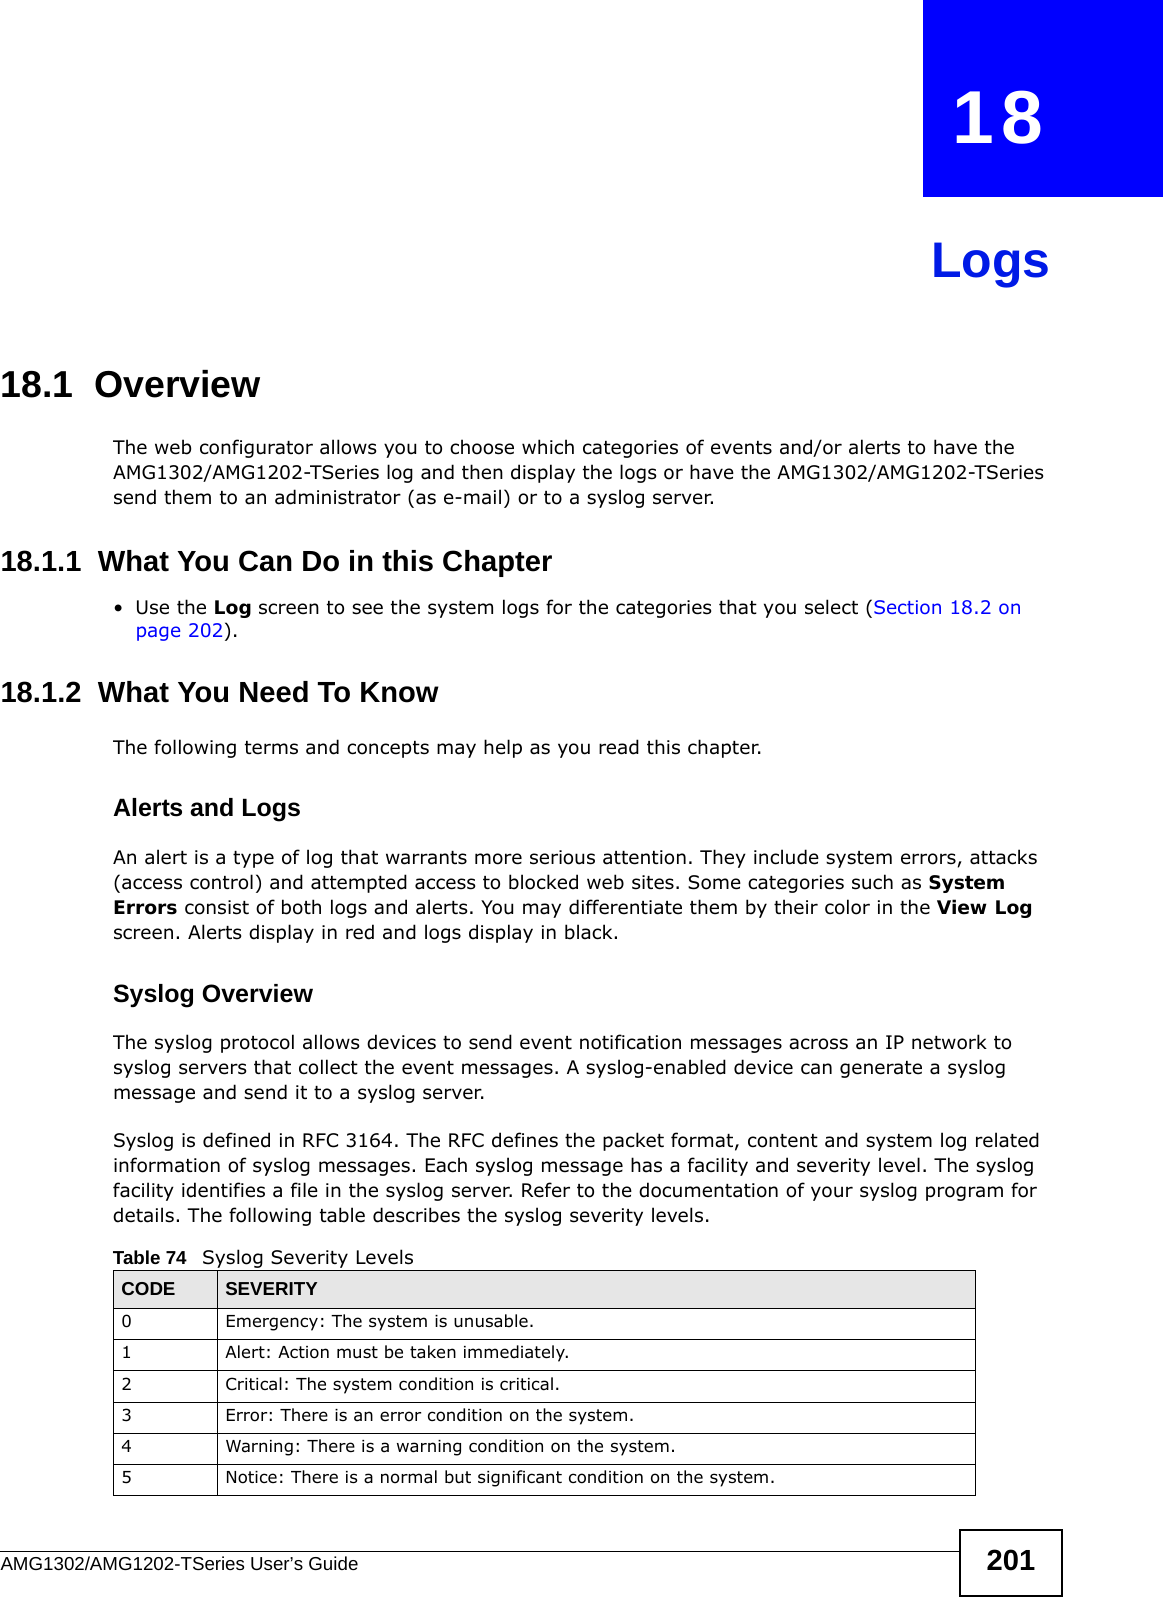 AMG1302/AMG1202-TSeries User’s Guide 201CHAPTER   18Logs18.1  Overview The web configurator allows you to choose which categories of events and/or alerts to have the AMG1302/AMG1202-TSeries log and then display the logs or have the AMG1302/AMG1202-TSeries send them to an administrator (as e-mail) or to a syslog server. 18.1.1  What You Can Do in this Chapter•Use the Log screen to see the system logs for the categories that you select (Section 18.2 on page 202).18.1.2  What You Need To KnowThe following terms and concepts may help as you read this chapter.Alerts and LogsAn alert is a type of log that warrants more serious attention. They include system errors, attacks (access control) and attempted access to blocked web sites. Some categories such as System Errors consist of both logs and alerts. You may differentiate them by their color in the View Log screen. Alerts display in red and logs display in black.Syslog Overview The syslog protocol allows devices to send event notification messages across an IP network to syslog servers that collect the event messages. A syslog-enabled device can generate a syslog message and send it to a syslog server.Syslog is defined in RFC 3164. The RFC defines the packet format, content and system log related information of syslog messages. Each syslog message has a facility and severity level. The syslog facility identifies a file in the syslog server. Refer to the documentation of your syslog program for details. The following table describes the syslog severity levels. Table 74   Syslog Severity LevelsCODE SEVERITY0 Emergency: The system is unusable.1 Alert: Action must be taken immediately.2 Critical: The system condition is critical.3 Error: There is an error condition on the system.4 Warning: There is a warning condition on the system.5 Notice: There is a normal but significant condition on the system.